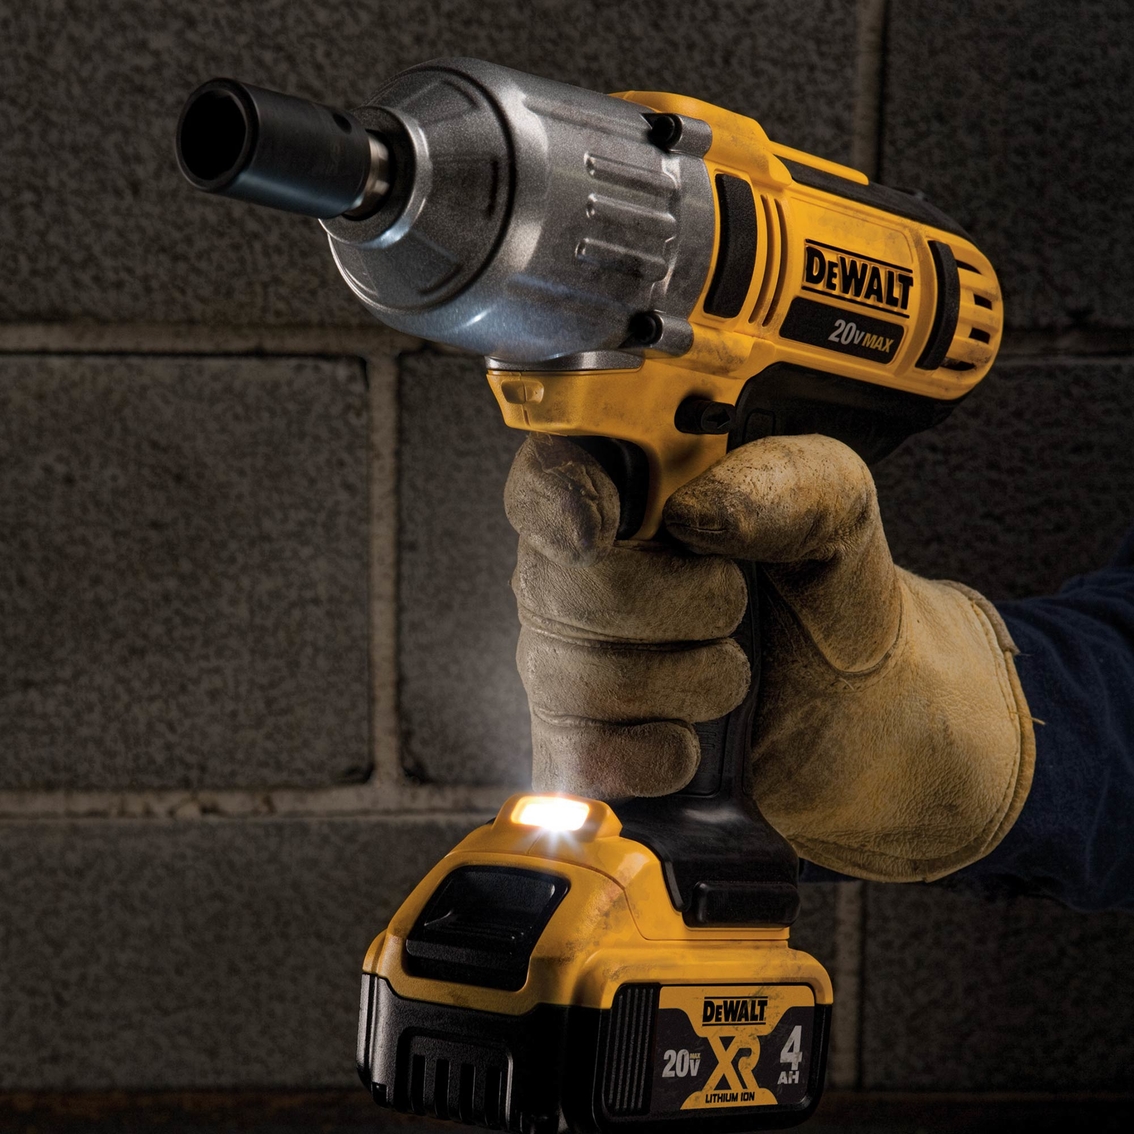 DeWalt DCF889M2 20V MAX* 1/2 In. High Torque Impact Wrench Kit - Image 9 of 9